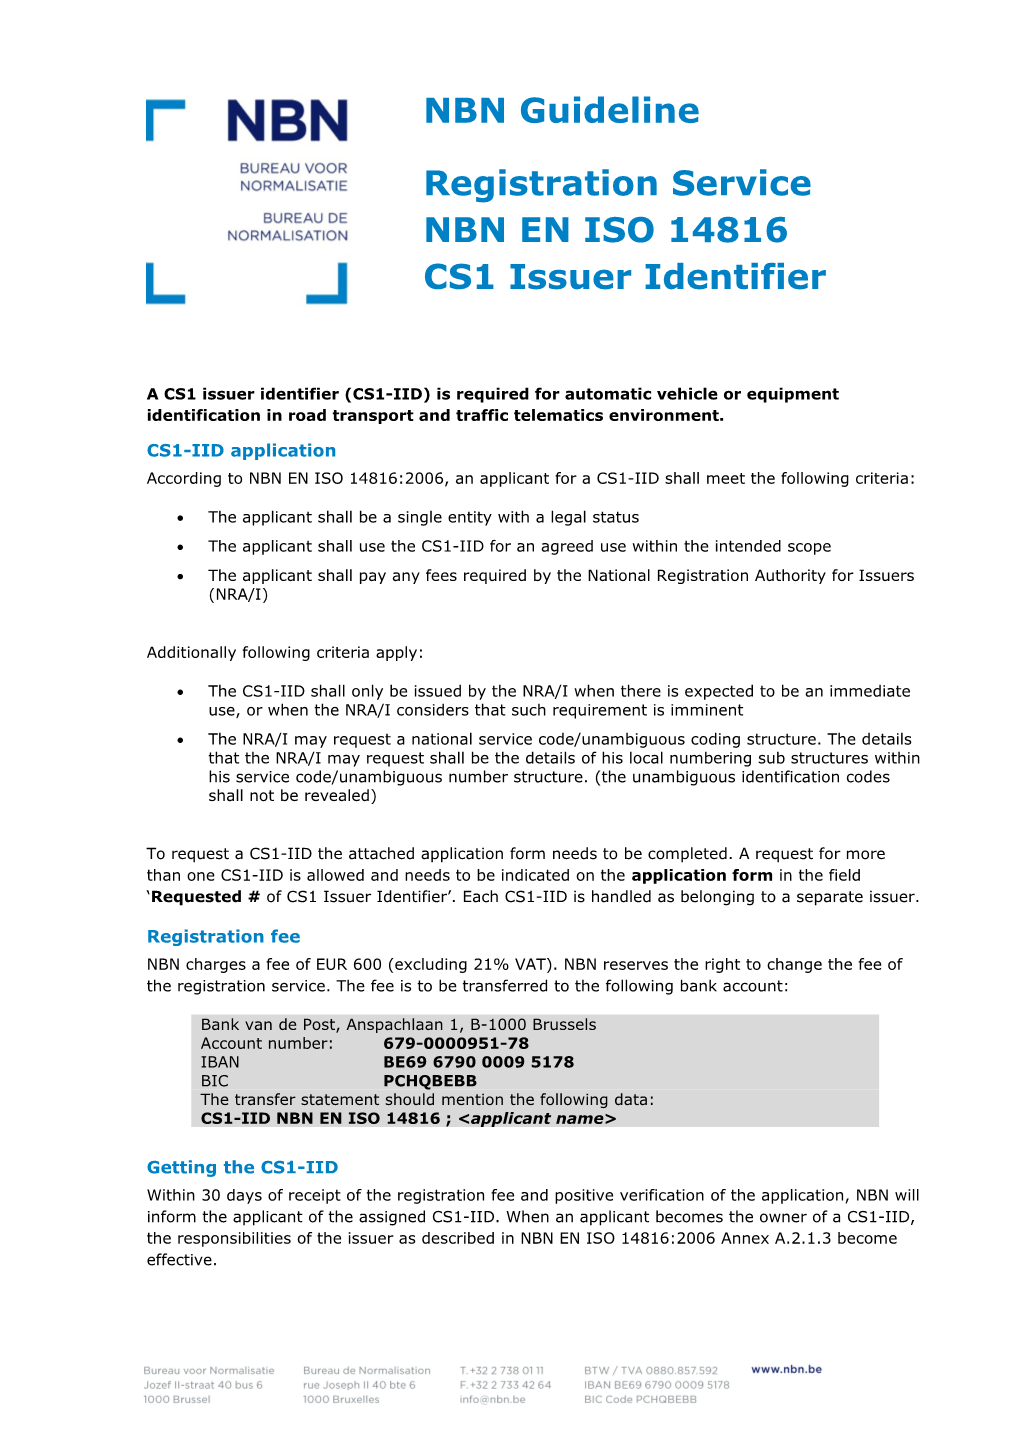 A CS1 Issuer Identifier (CS1-IID) Is Required for Automatic Vehicle Or Equipment Identification